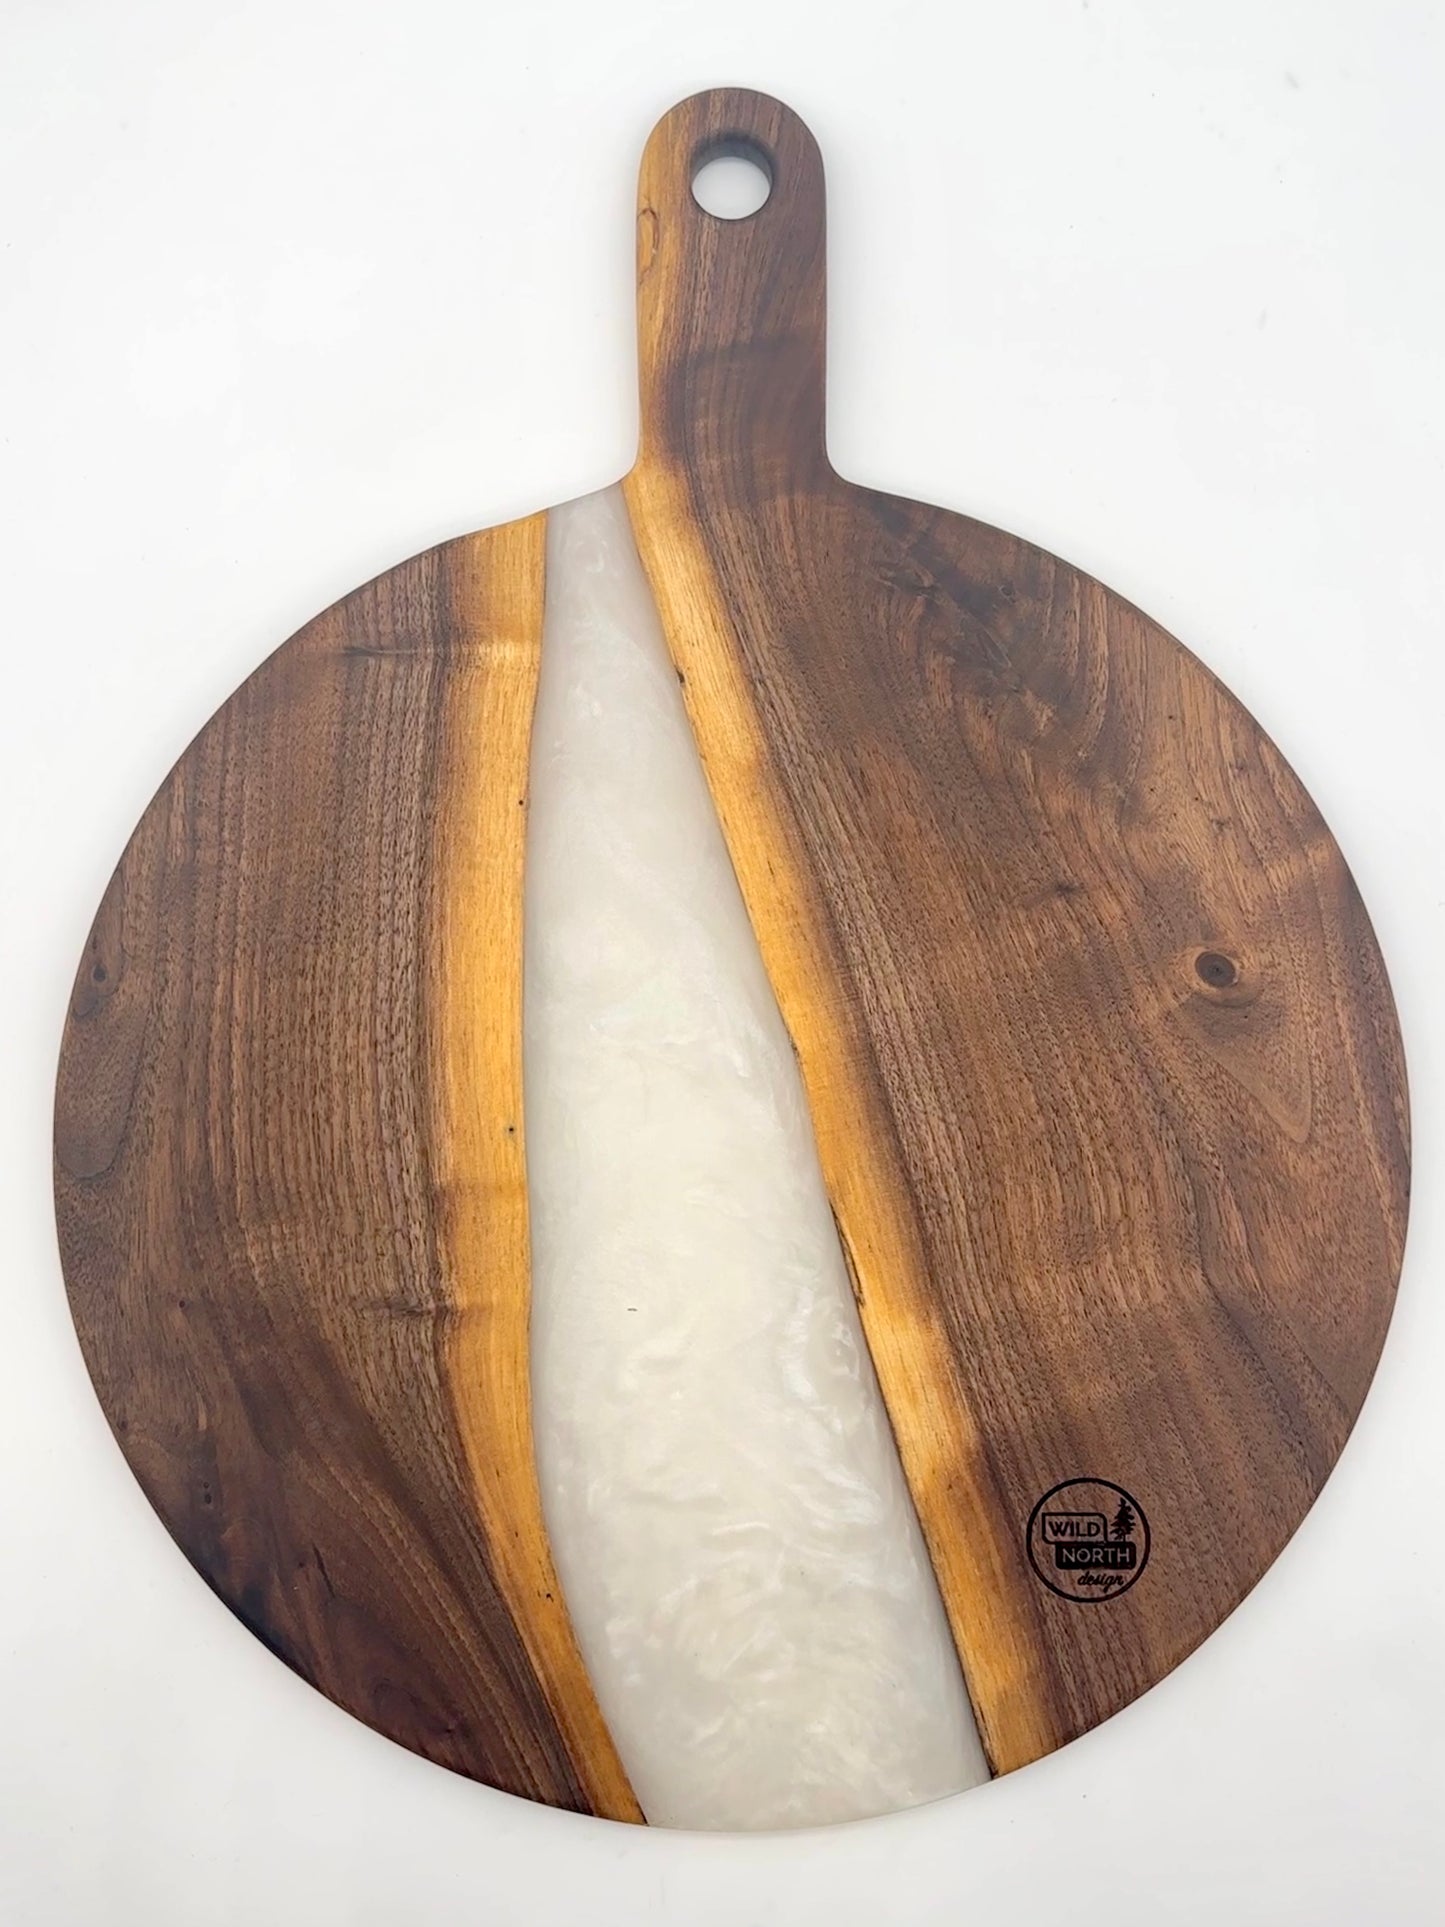 Large round walnut board with pearl white resin